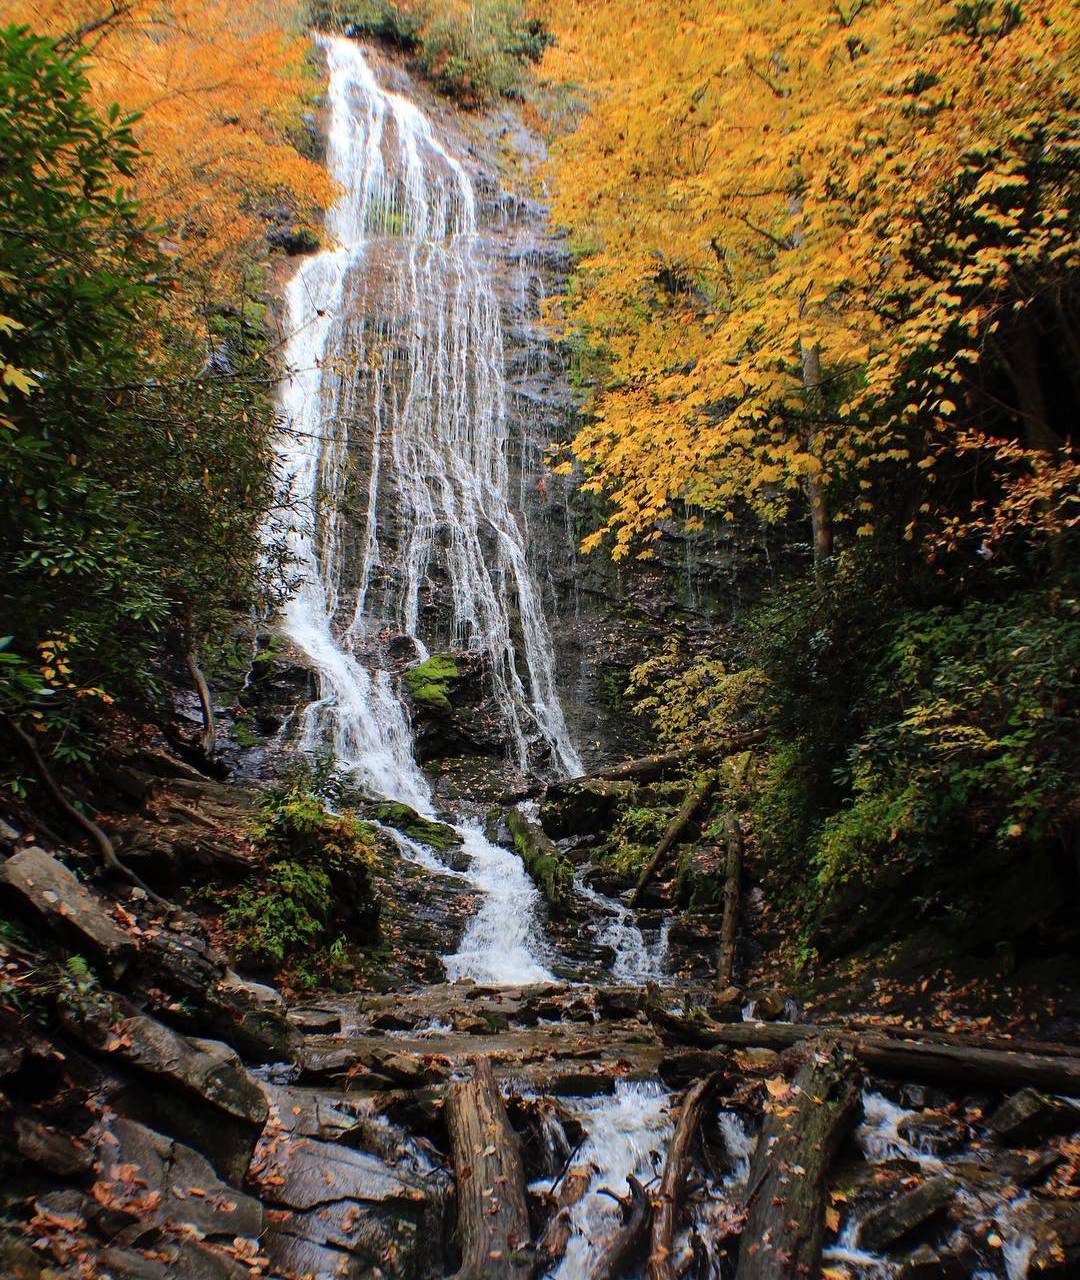 A scenic waterfall cascades down a rocky cliff surrounded by autumn-colored trees, with fallen logs and rocks in the foreground, perfect for fall winter travel.